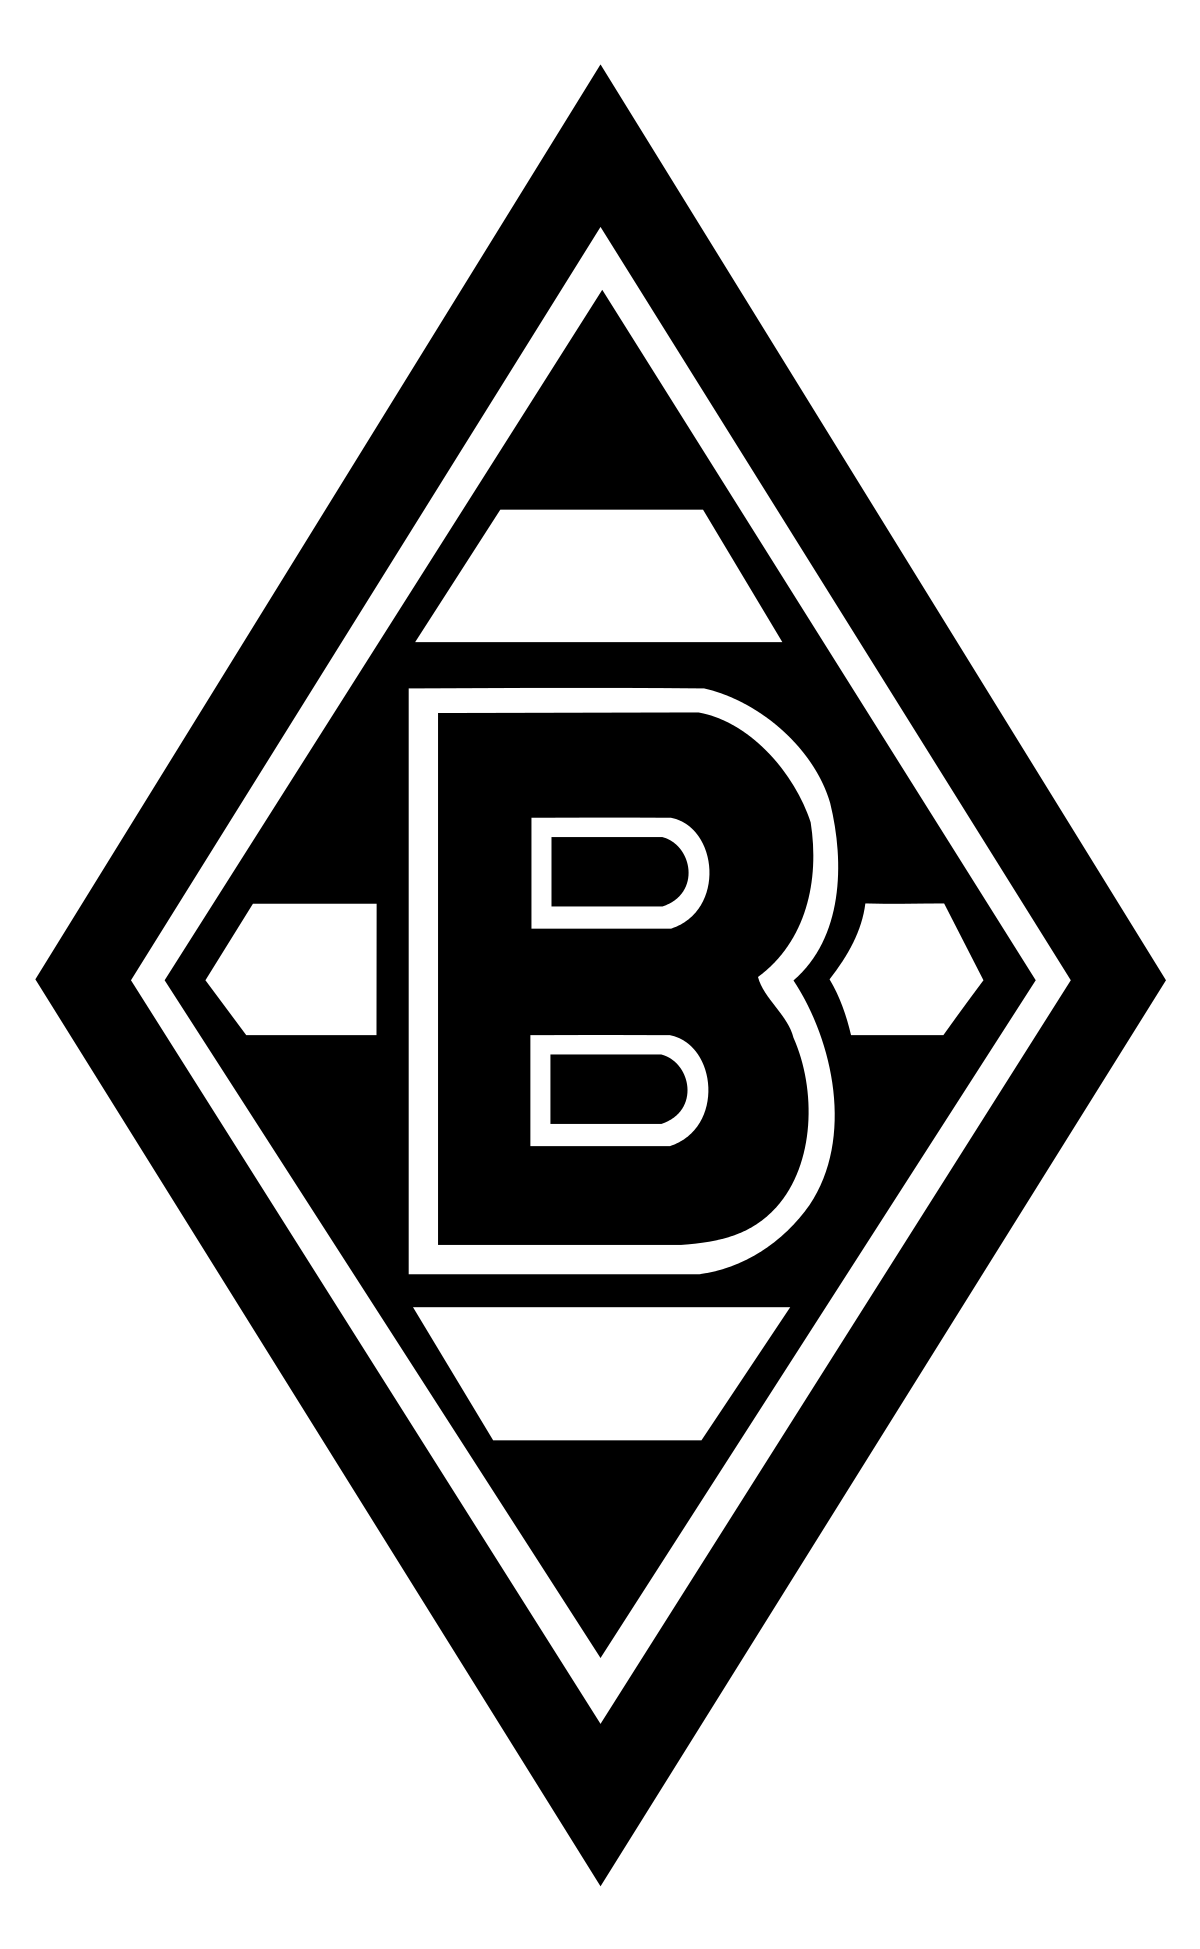 Welcome to the English fan page for German club Borussia Monchengladbach! #fohlenelf
COME ON YOU FOALS!!!🐴⚽️🖤⬜️💚